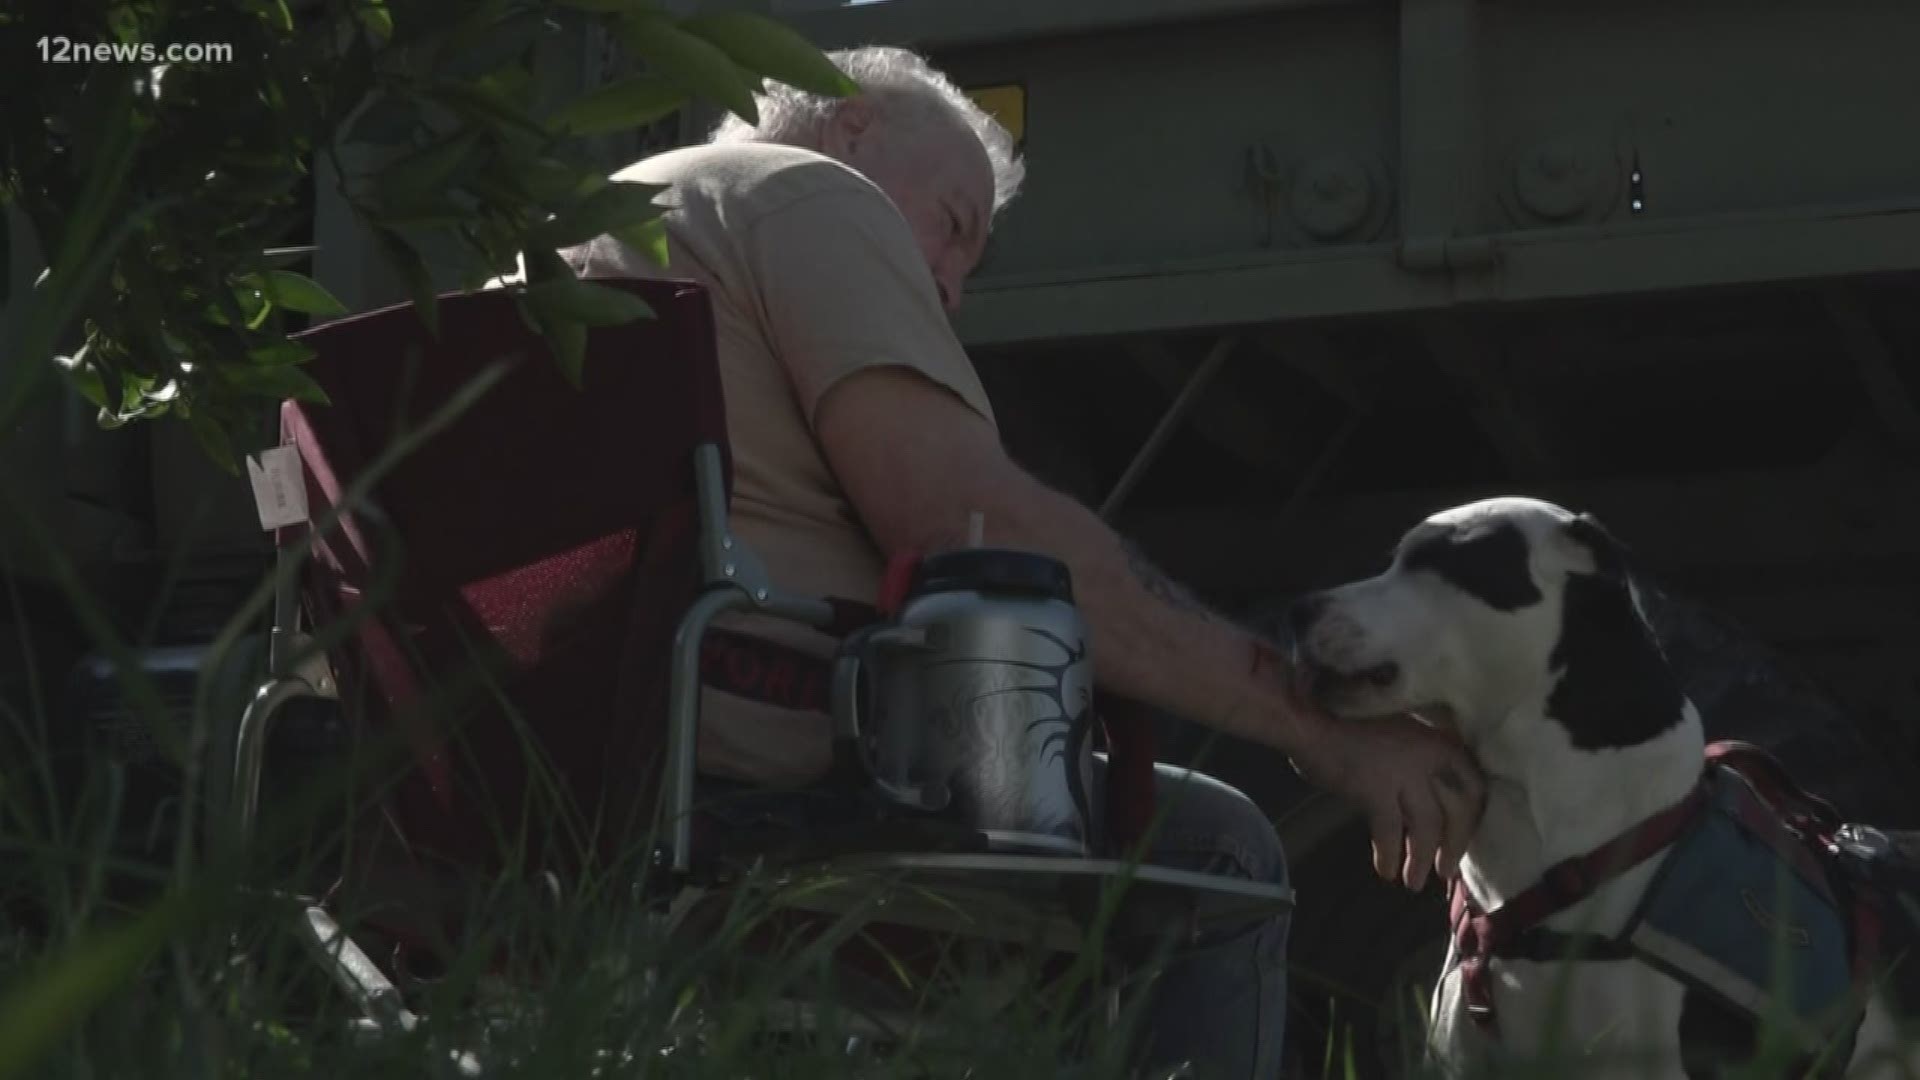 Veteran Bill Larson doesn't go anywhere without his fury friend and service dog, Whopper. But things got complicated when Larson tried to bring Whopper to O'Brien's.